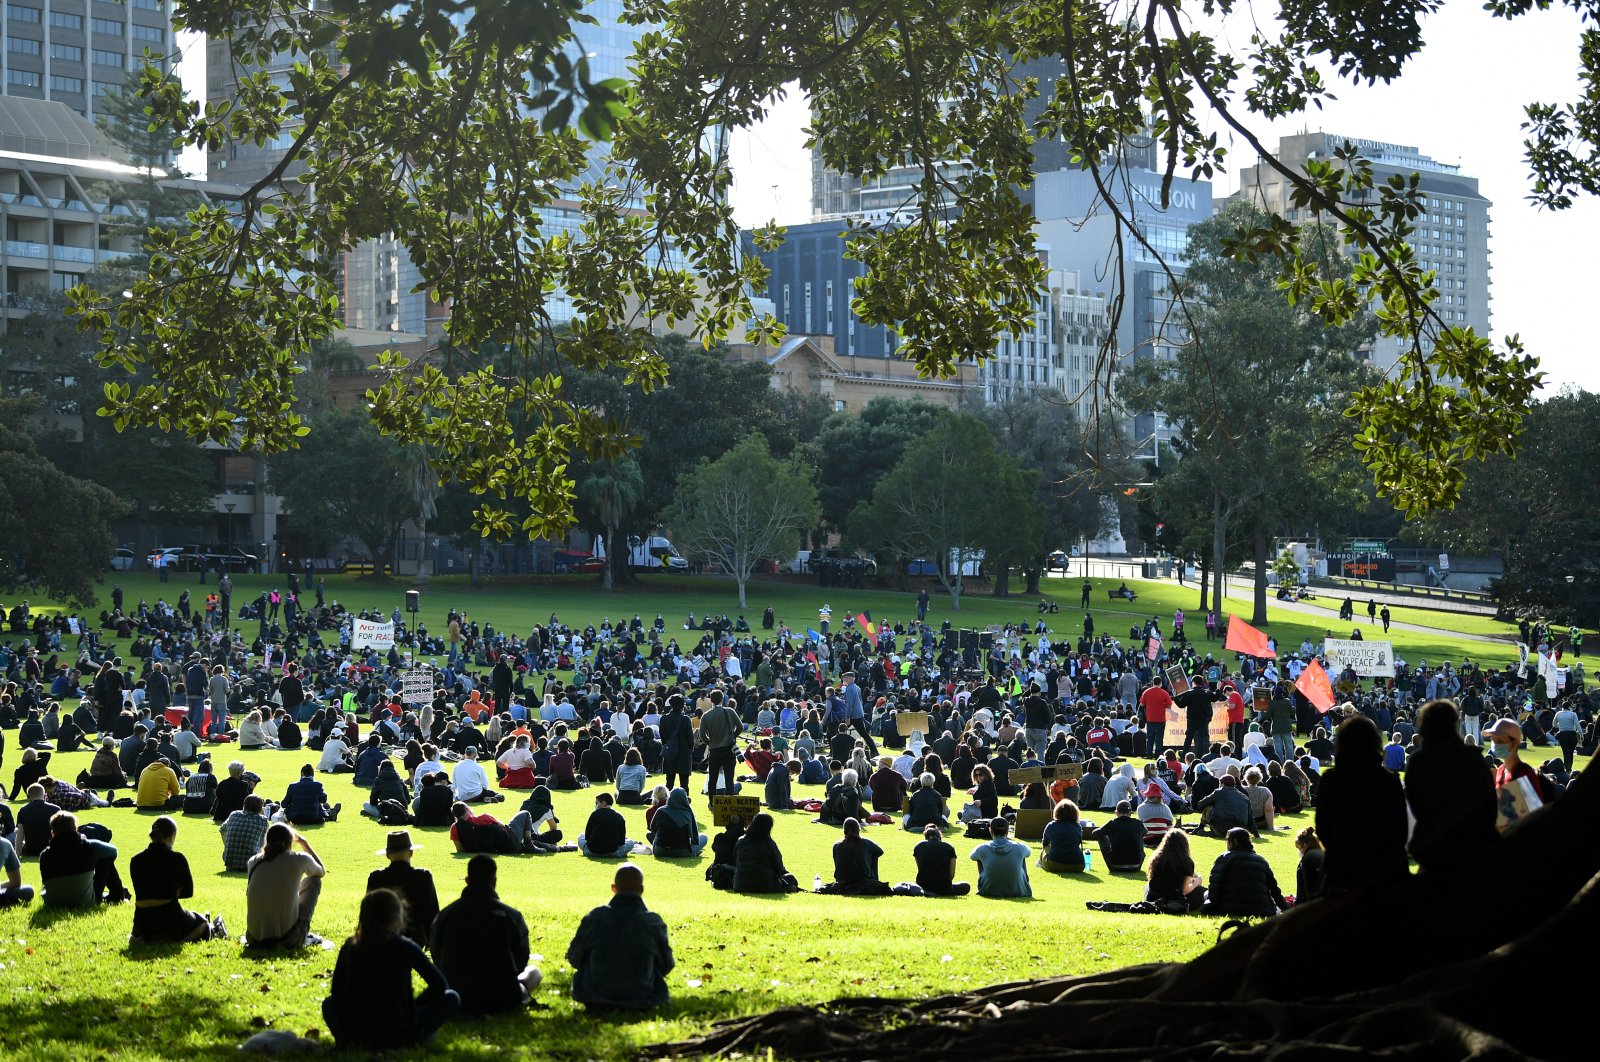 Protesters participate in a Black Lives Matter (BLM) rally at The Domain in Sydney, Australia, July 5, 2020. (EPA Photo)